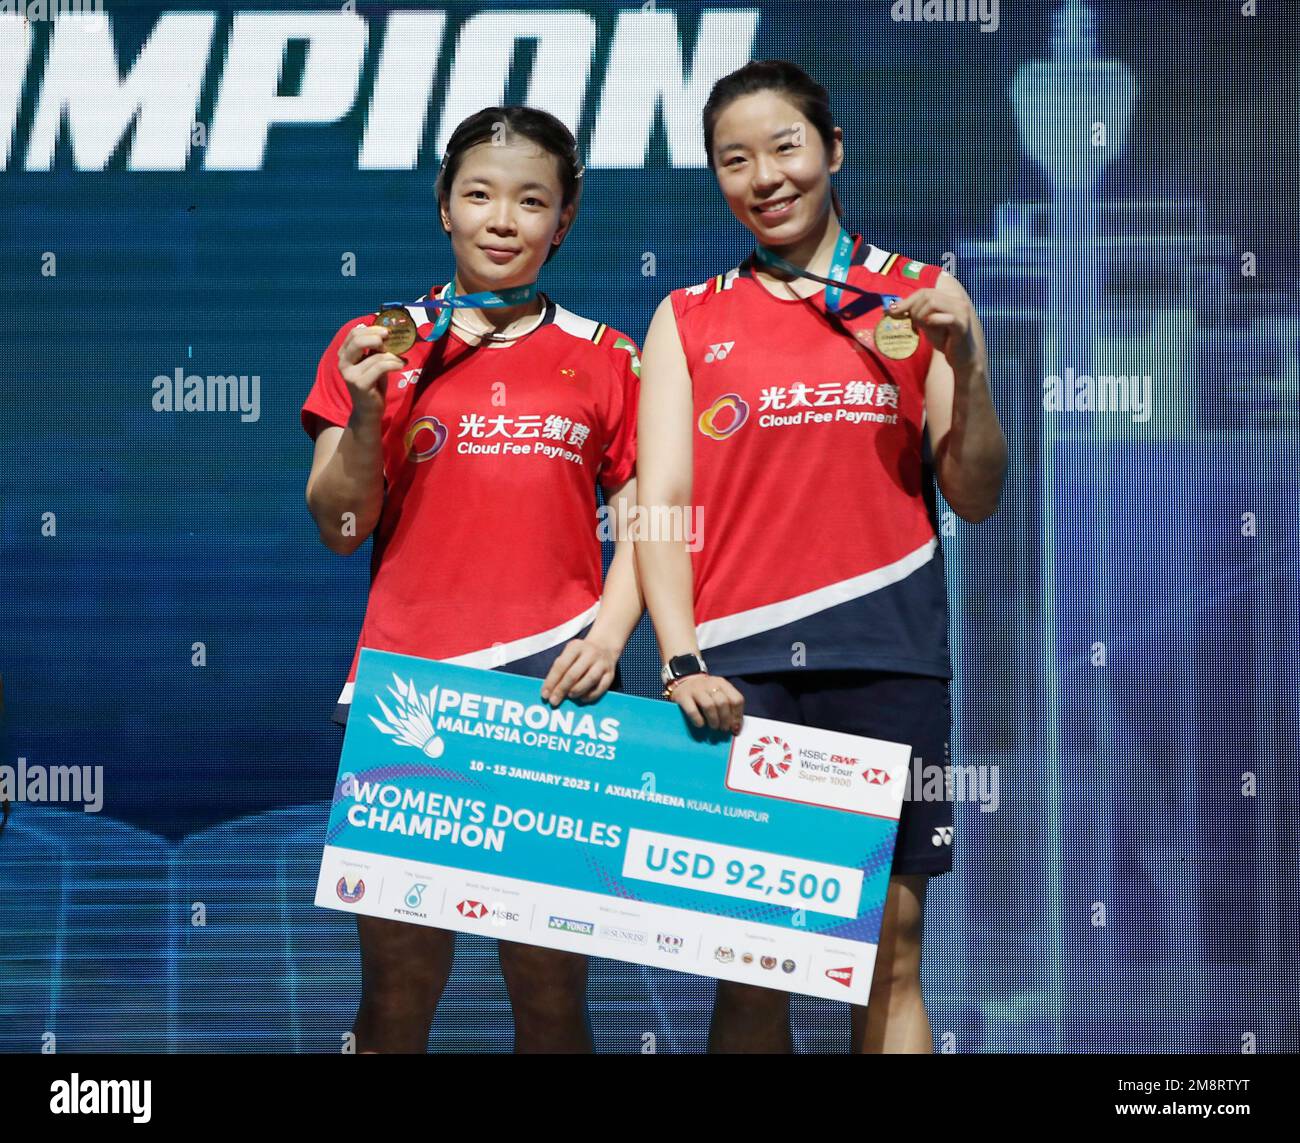 Chen Qing Chen (L) and Jia Yi Fan of China pose for photo with their medals at the medal ceremony for the Women Doubles Finals match of the Petronas Malaysia Open 2023